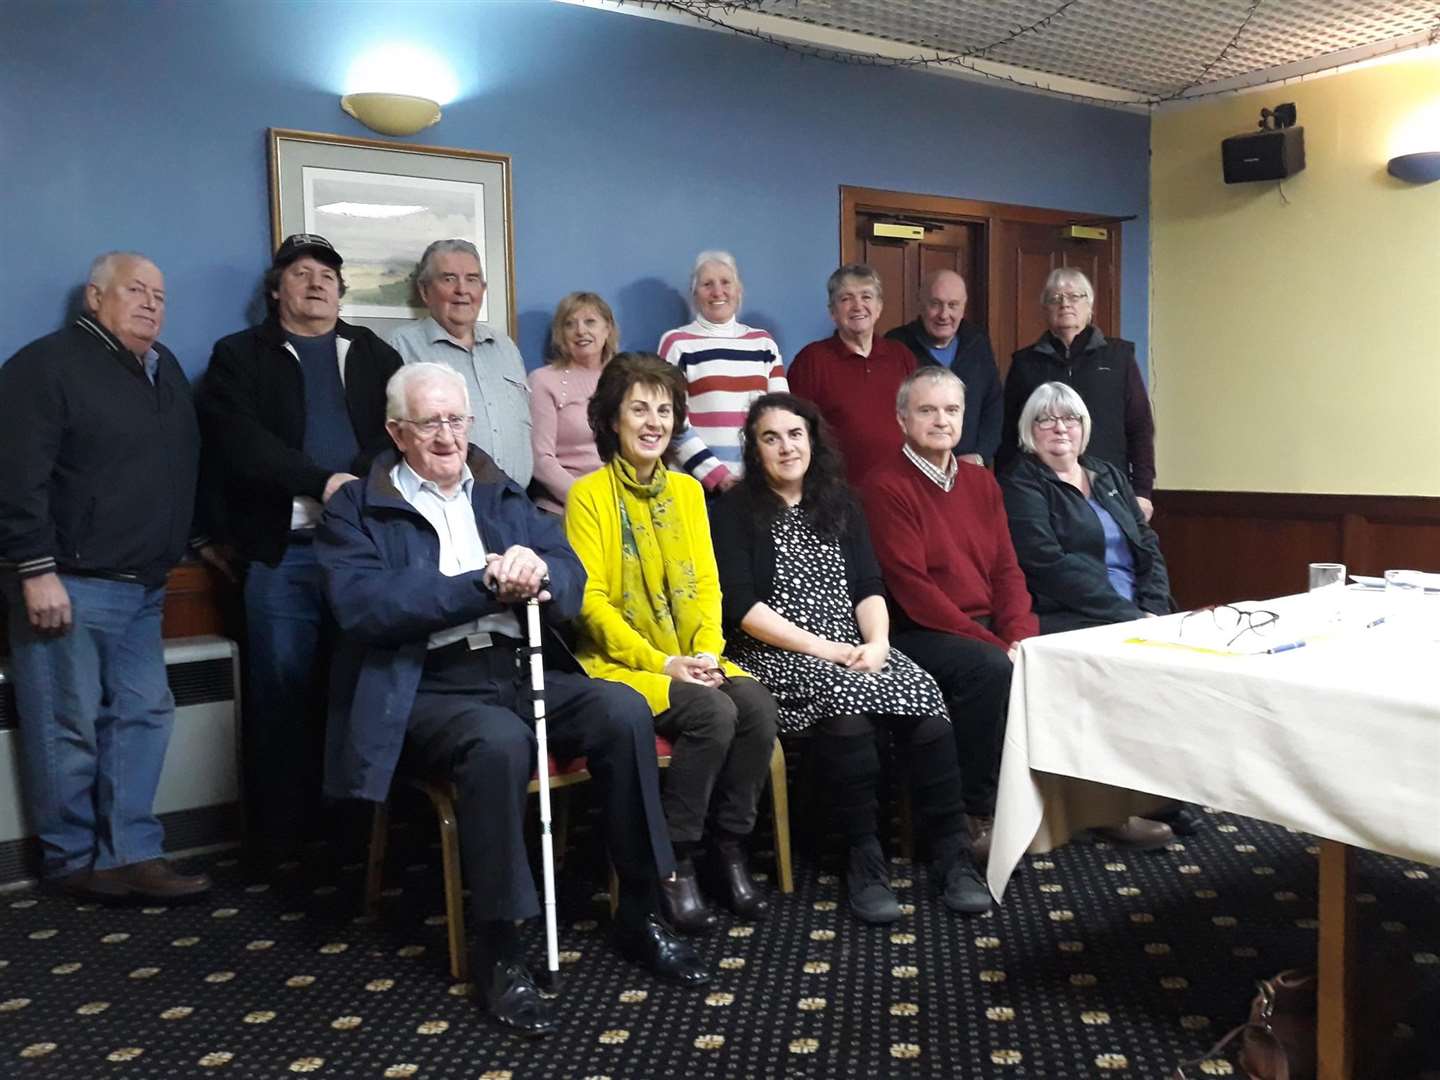 Thurso's new community councillors. Back row (from left): Colin Johnson, Daidie Simpson, Bert Macleod, Thelma Mackenzie, Elspeth Husband, Eric Drummond, Billy Smith and James Campbell. Front: Ian Wright, Gill Arrowsmith, Louise Smith, Ron Gunn and Rae Smith.